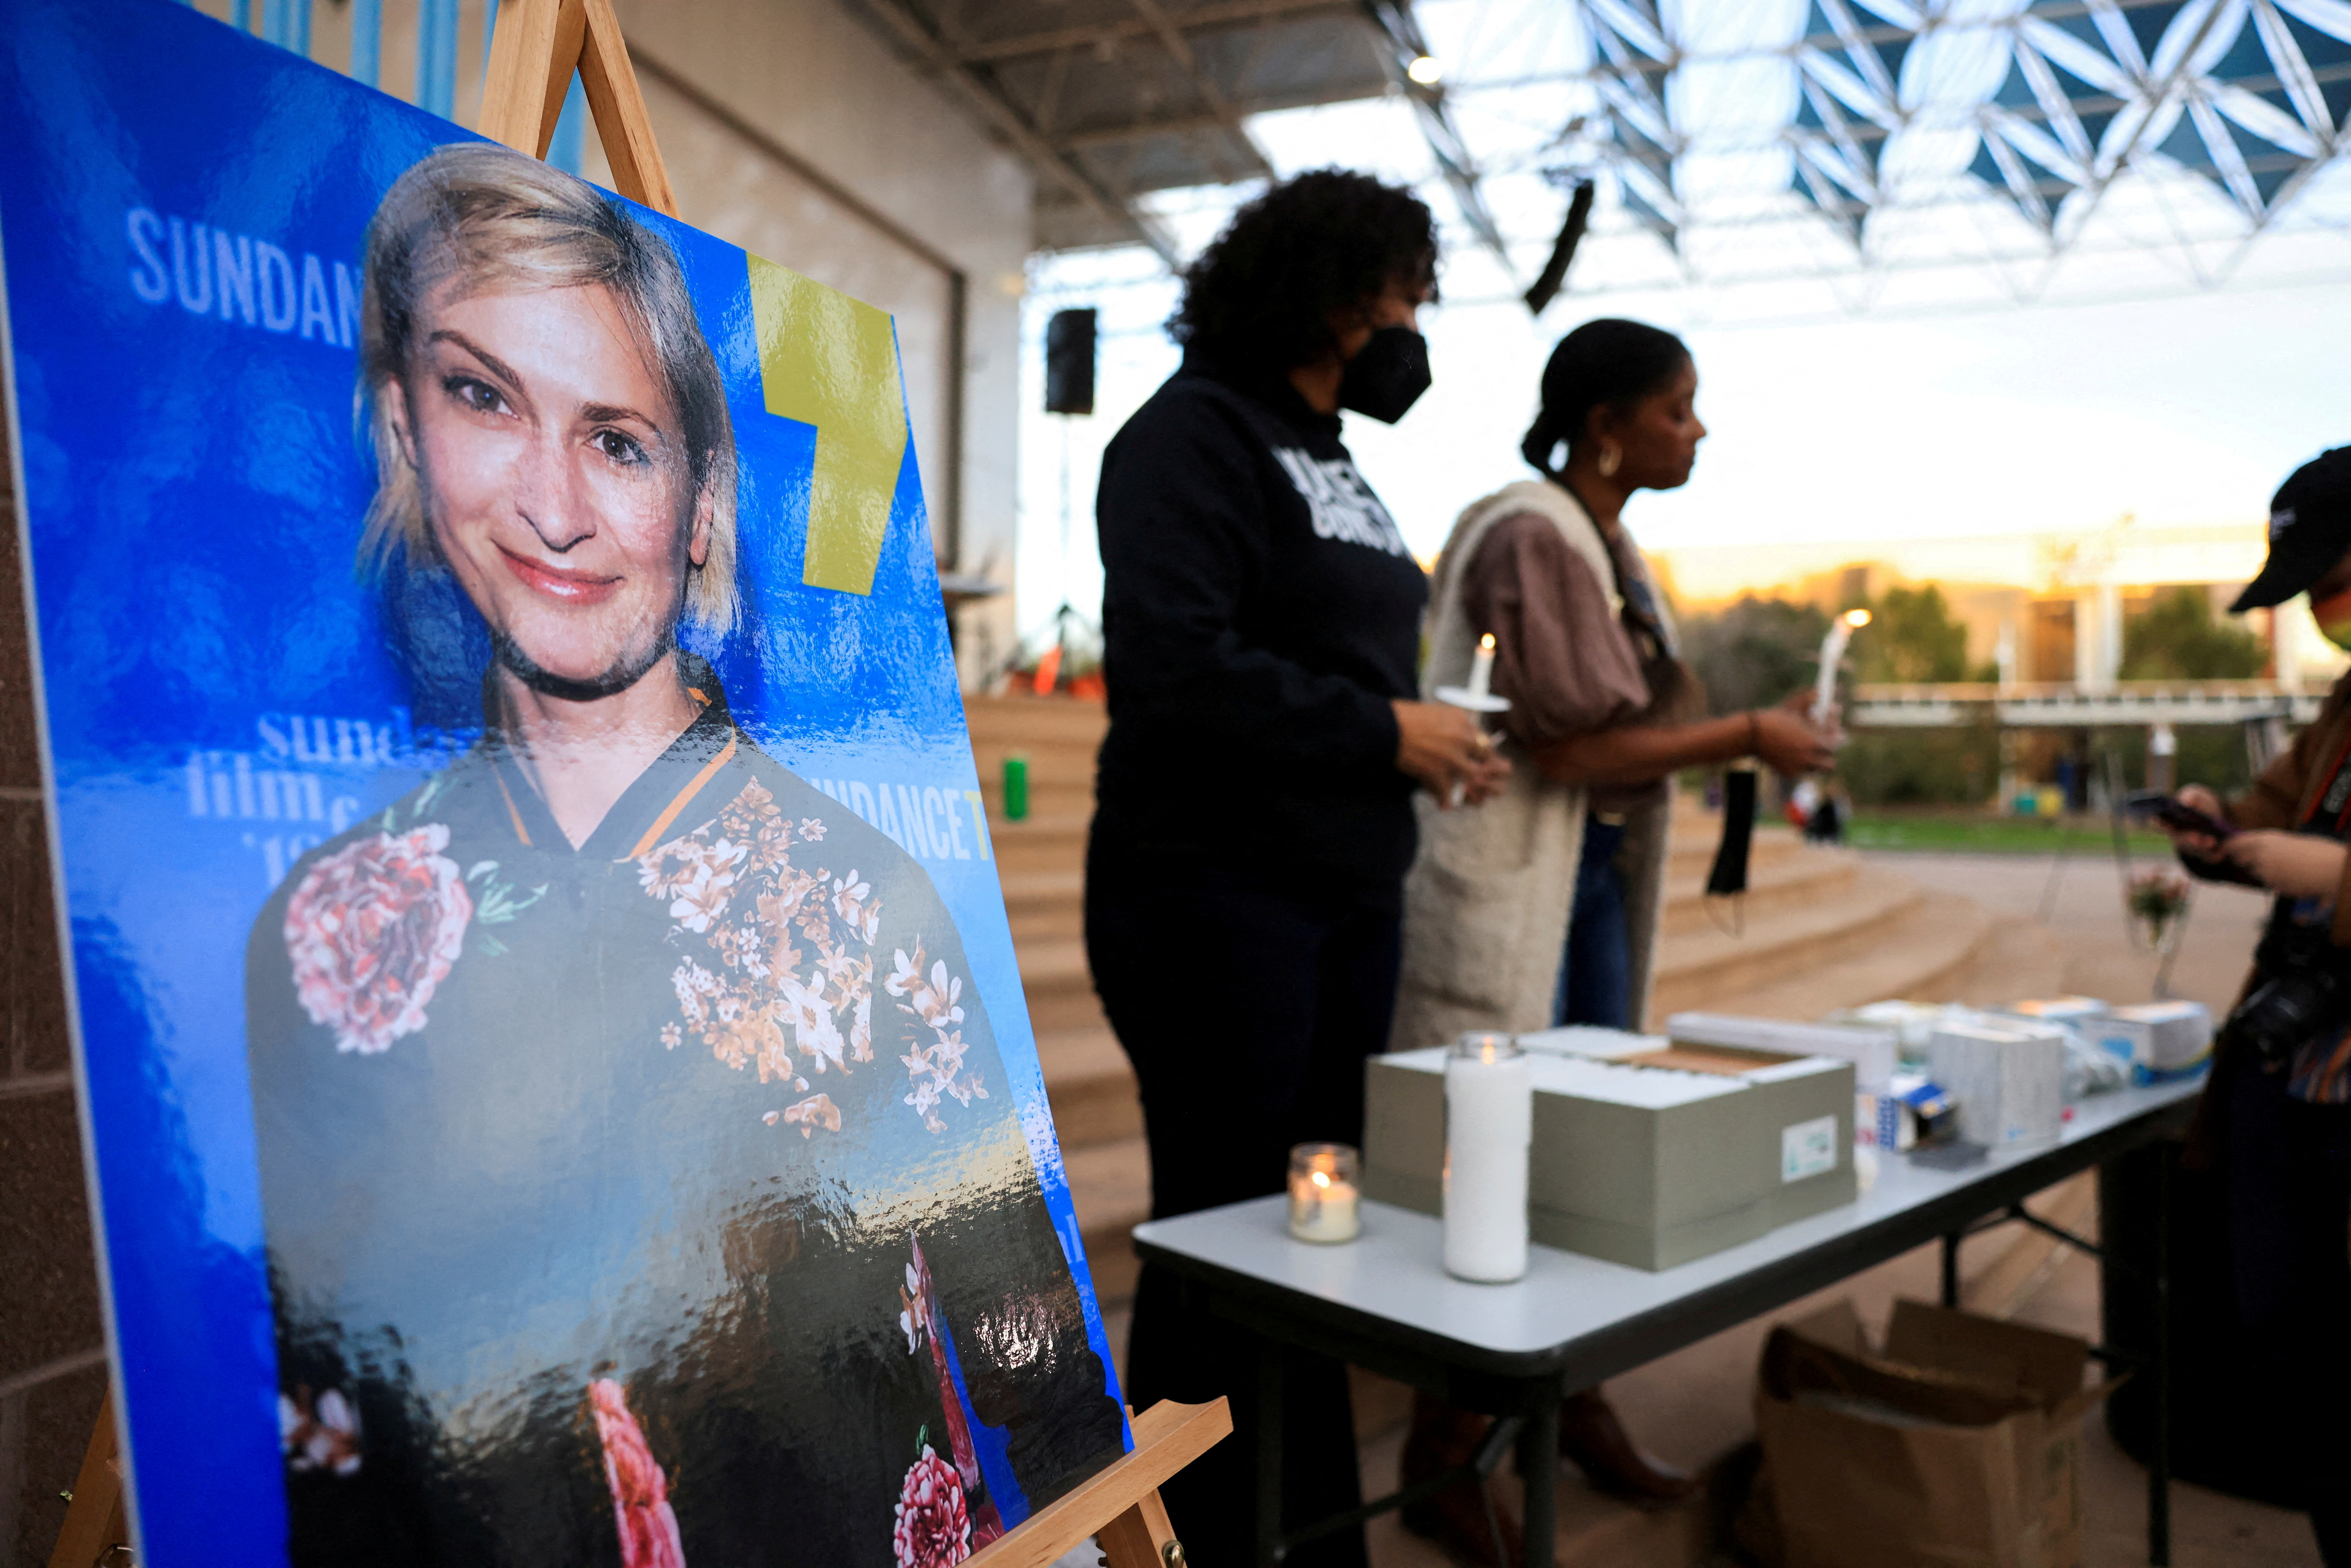 An image of cinematographer Halyna Hutchins, who died after being shot by Alec Baldwin on the set of her film "Rust"is shown at a vigil in his honor in Albuquerque, New Mexico, U.S., October 23, 2021. REUTERS